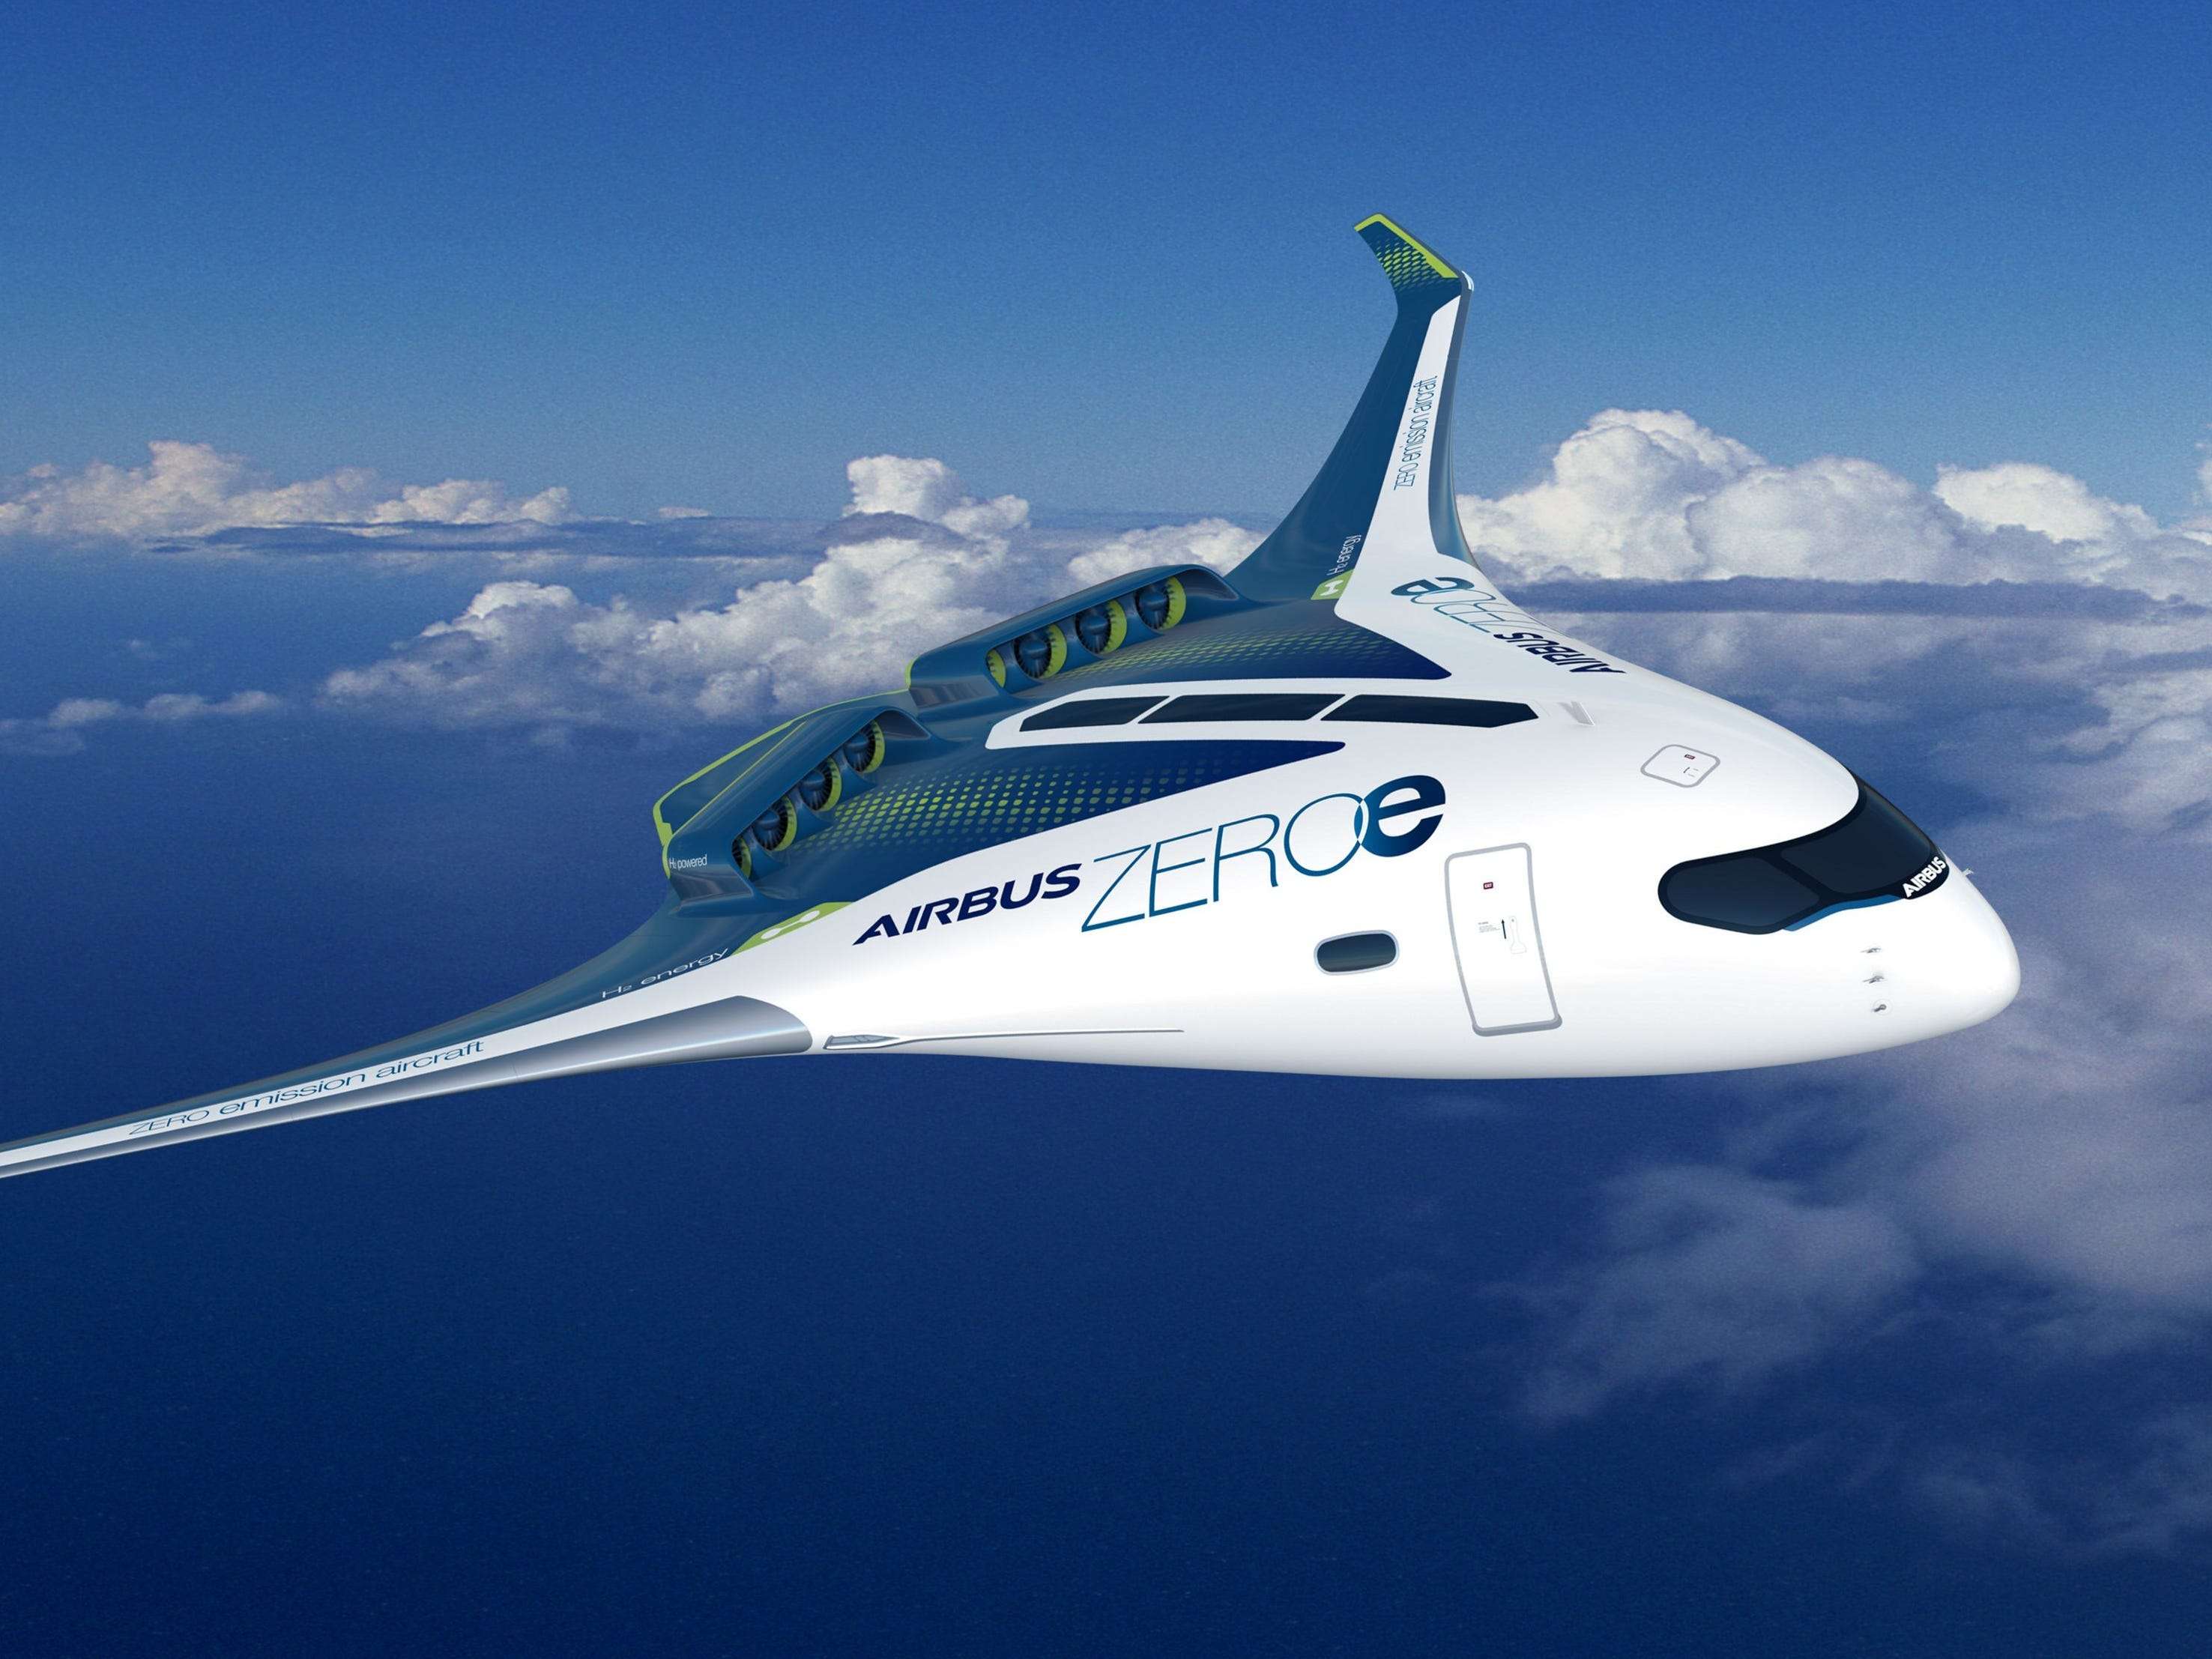 Airbus' new zeroemission concepts reveal the direction of the aviation